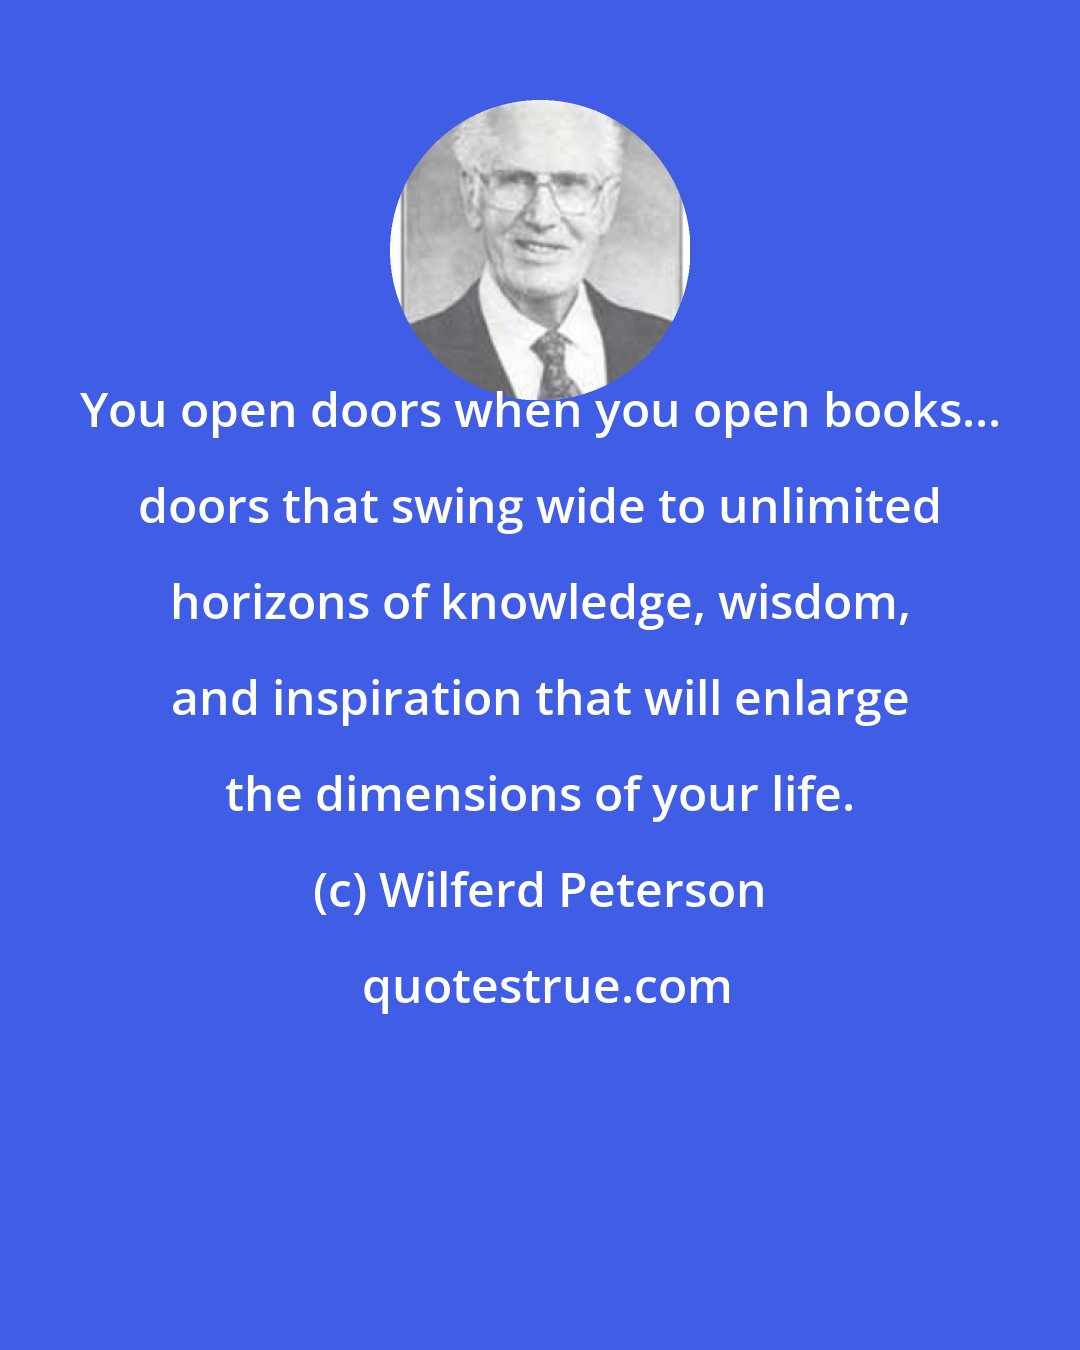 Wilferd Peterson: You open doors when you open books... doors that swing wide to unlimited horizons of knowledge, wisdom, and inspiration that will enlarge the dimensions of your life.